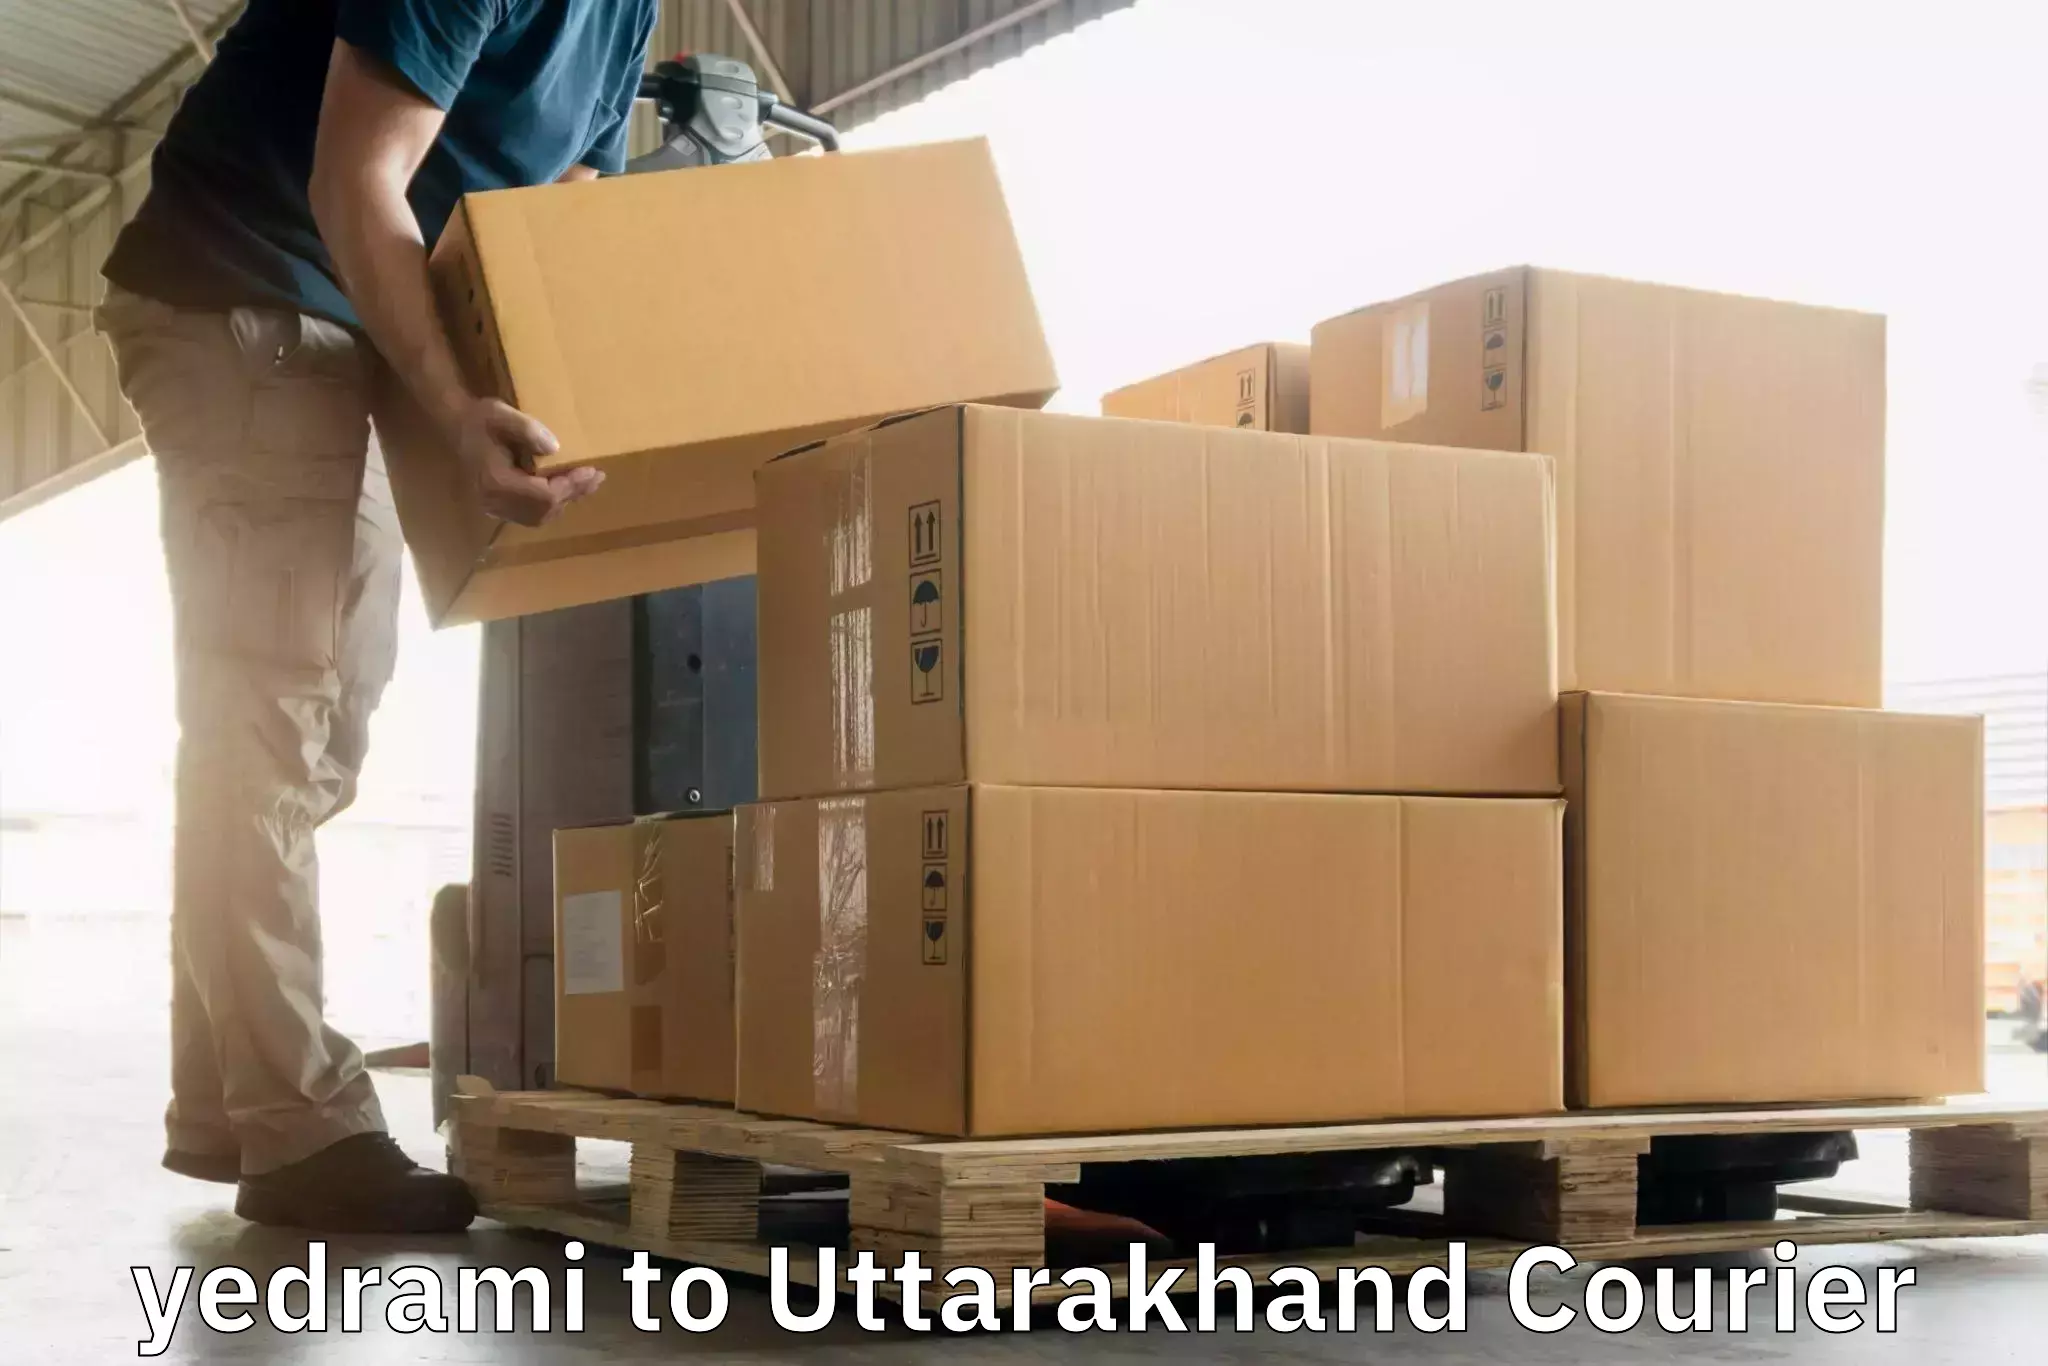 Personal courier services yedrami to Rudraprayag